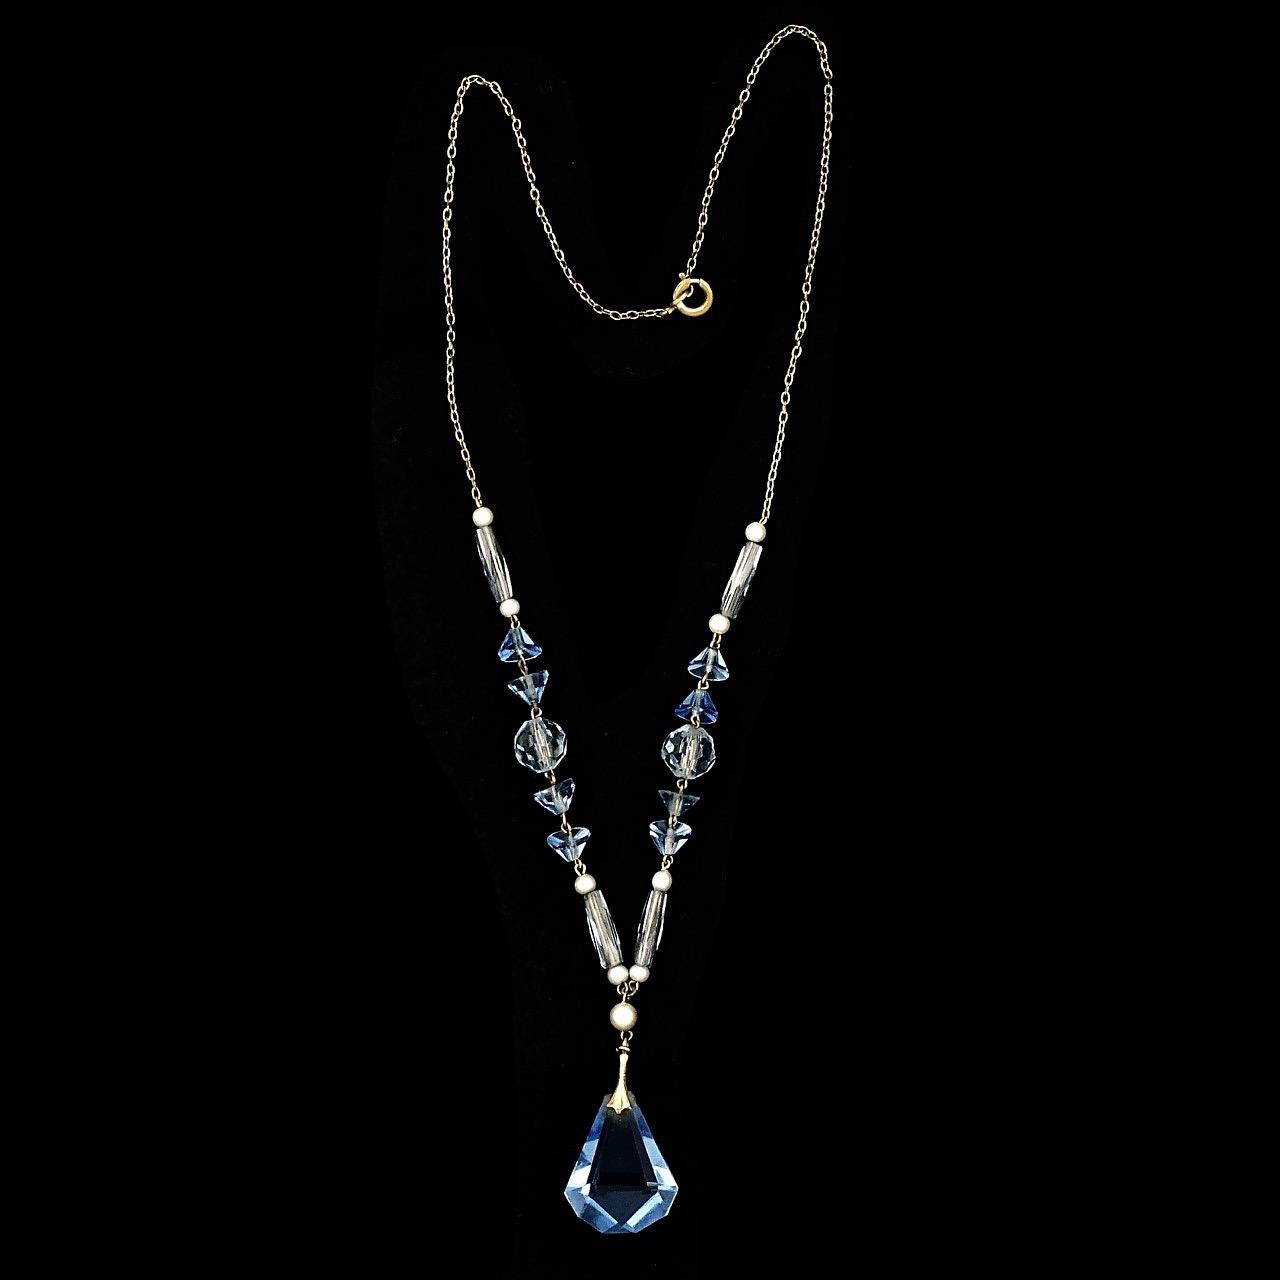 Art Deco Gold Tone Blue Glass Faux Pearl Necklace with Drop Pendant For Sale 3